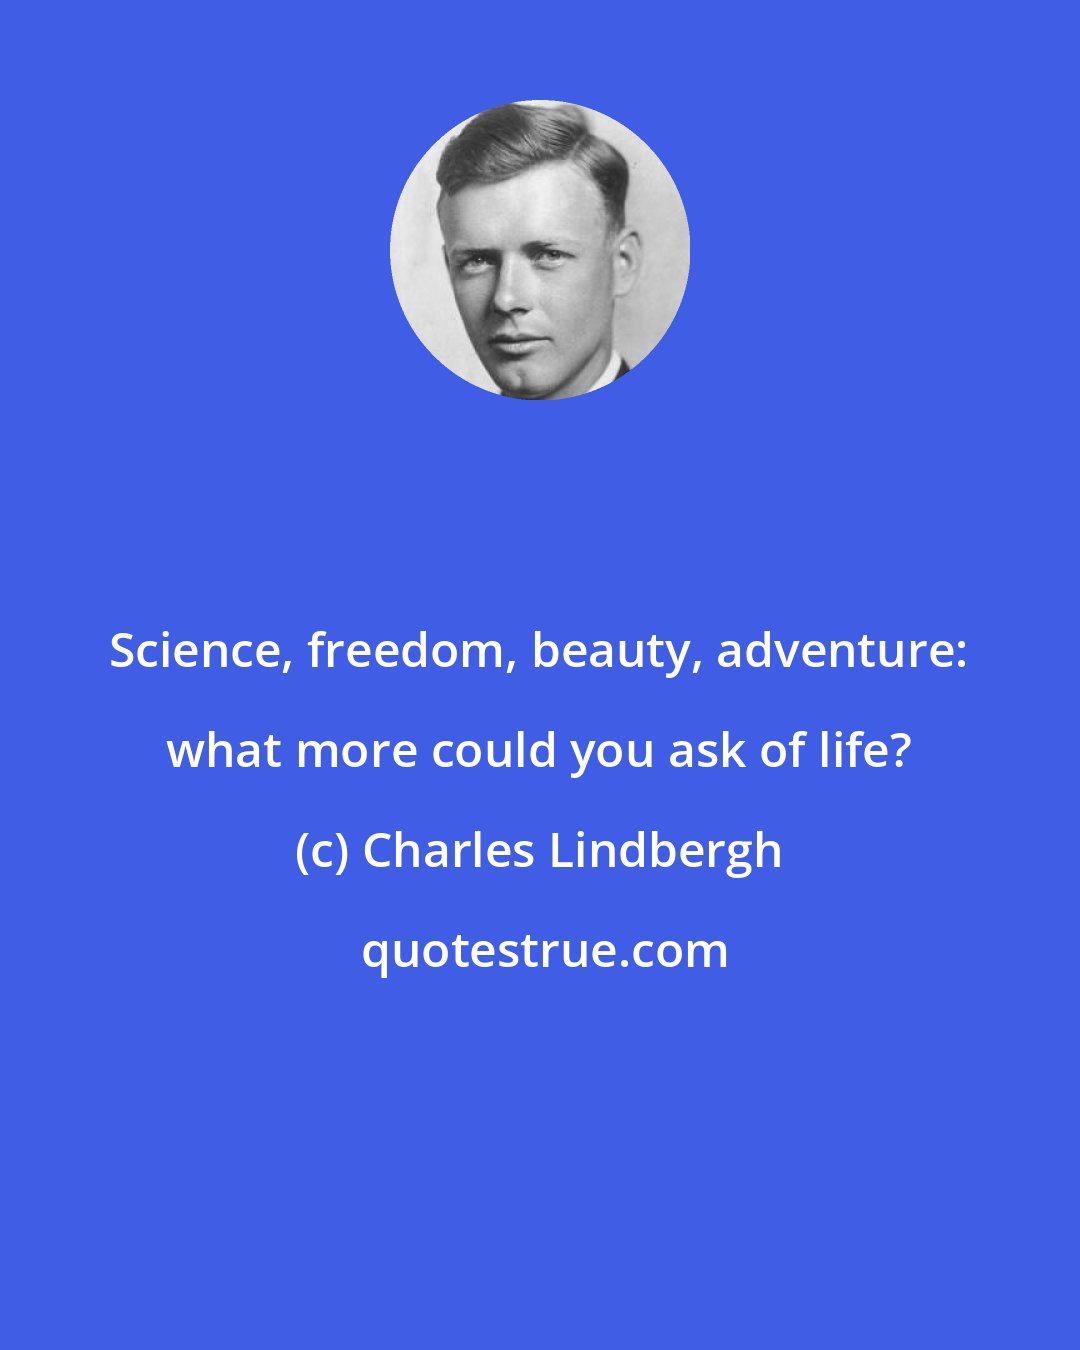 Charles Lindbergh: Science, freedom, beauty, adventure: what more could you ask of life?